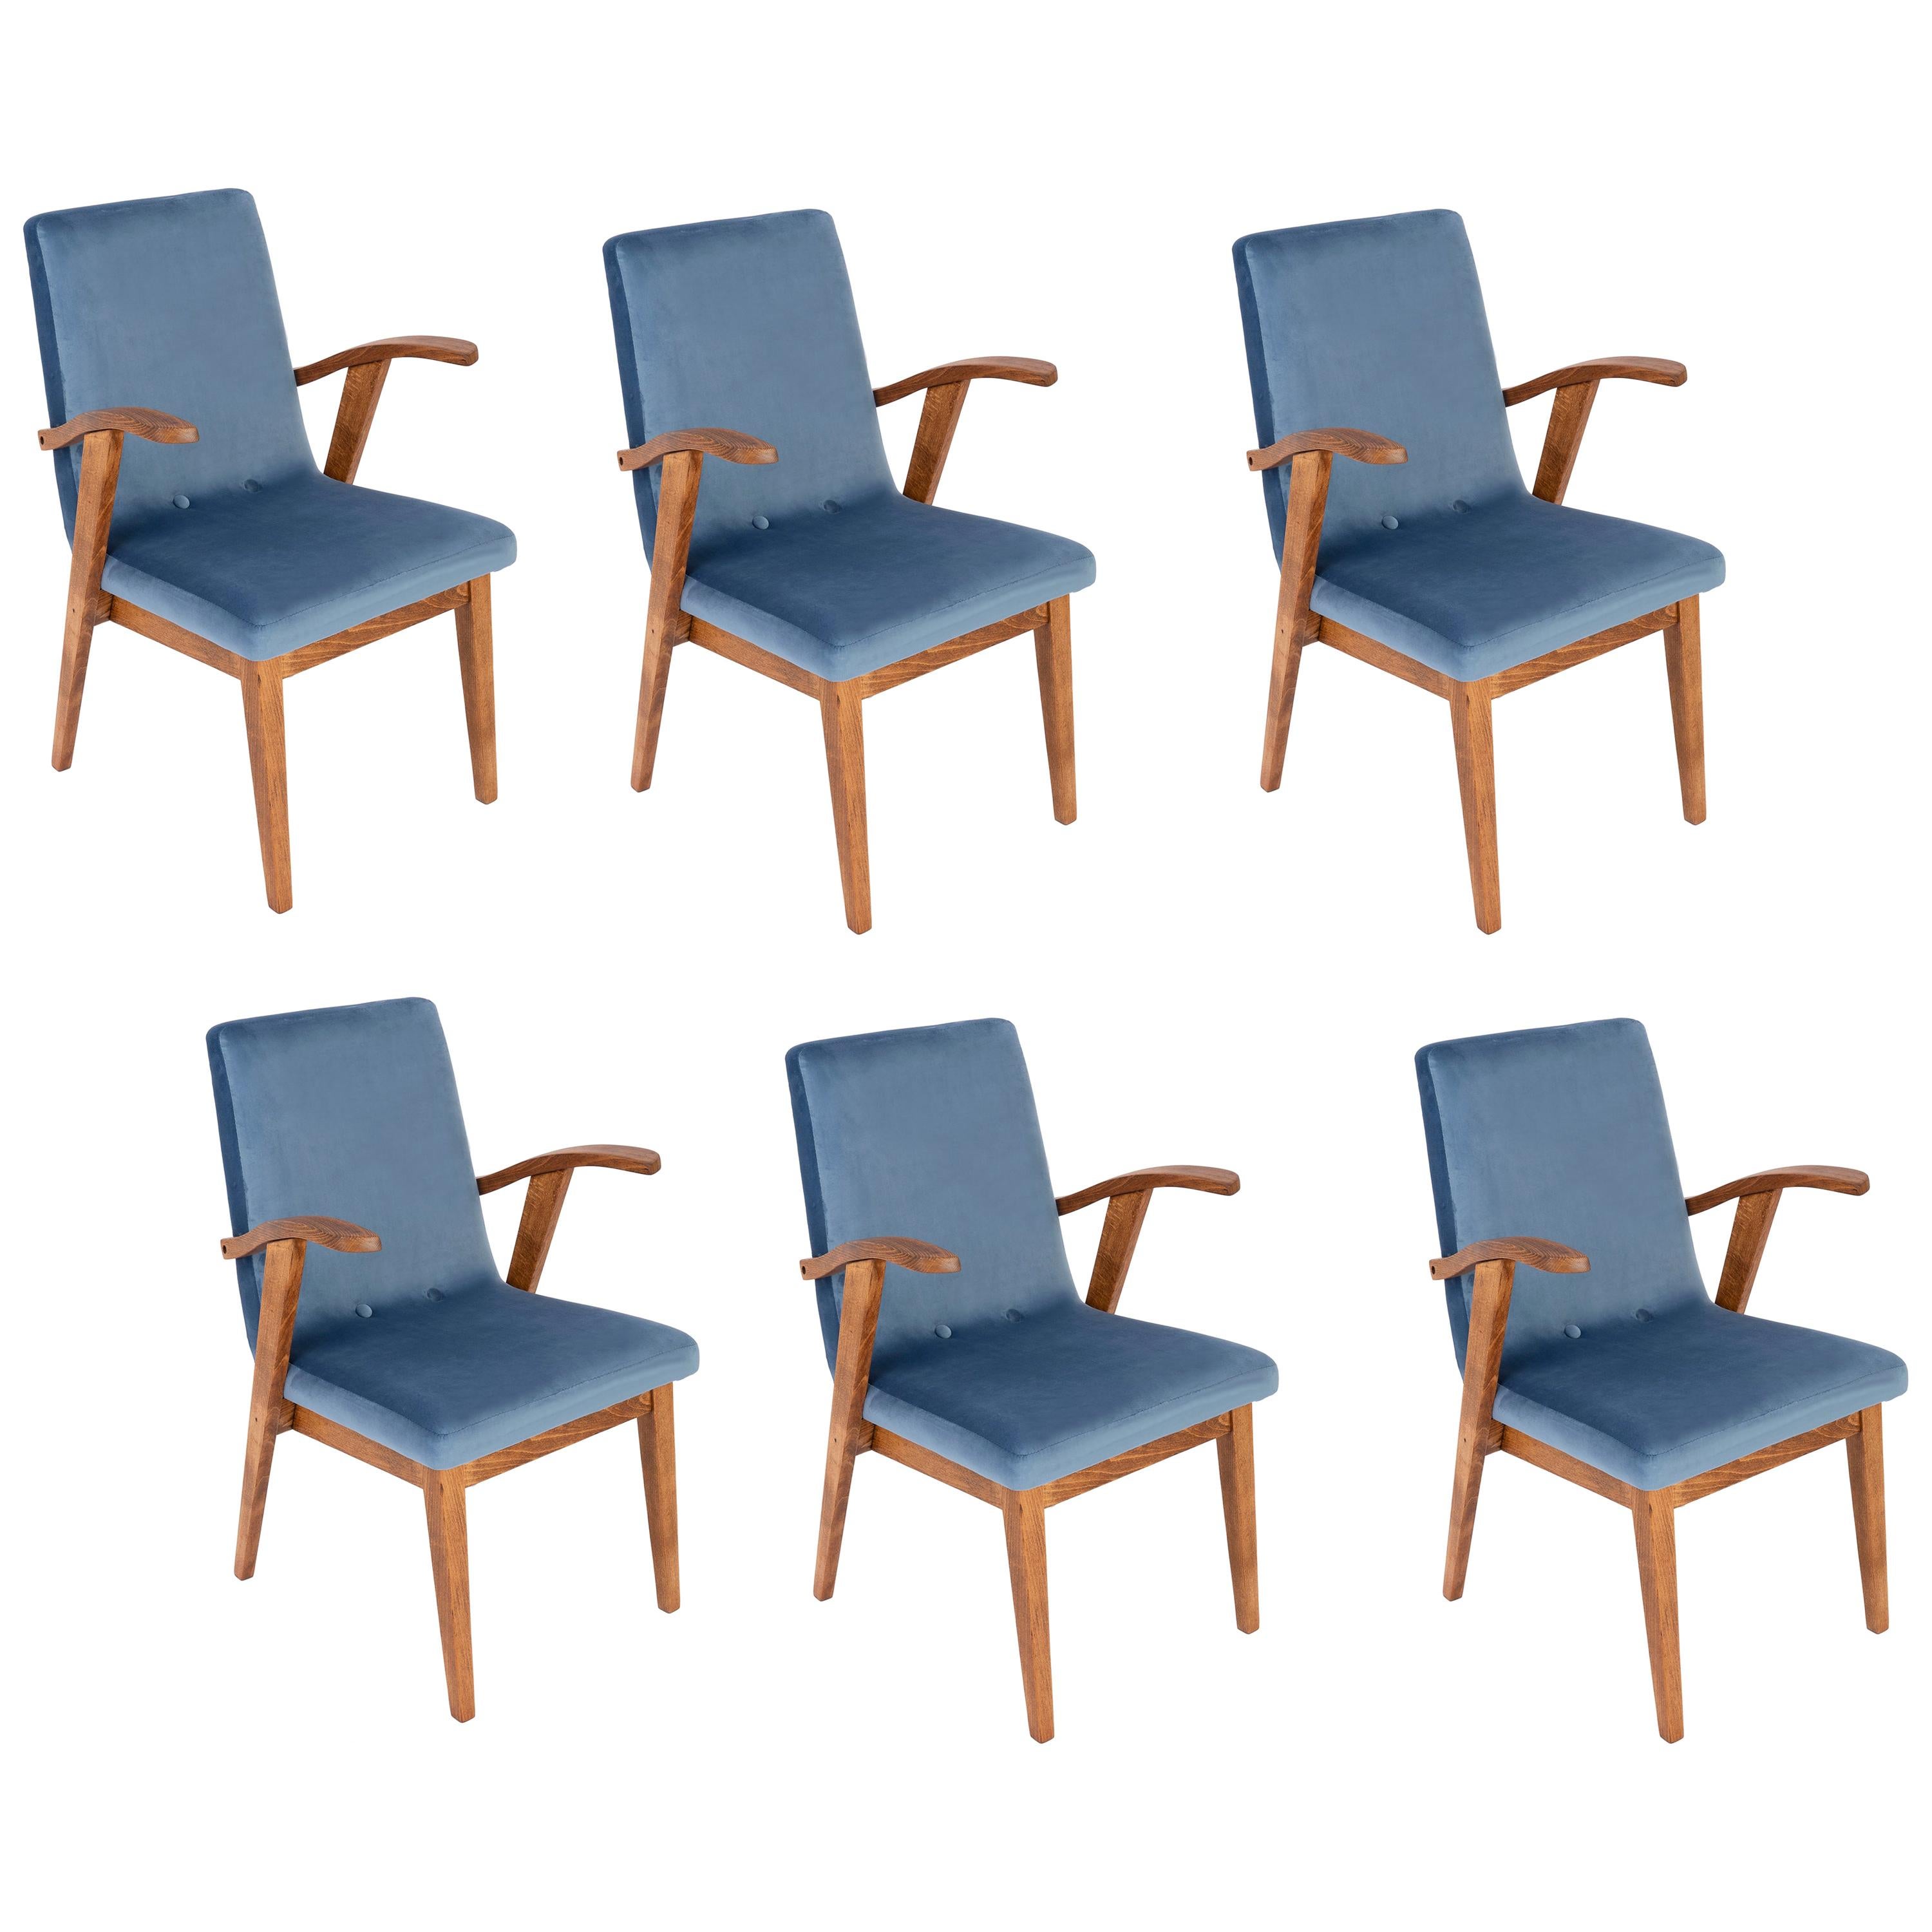 Set of Six 20th Century Vintage Blue Chairs by Mieczyslaw Puchala, 1960s For Sale